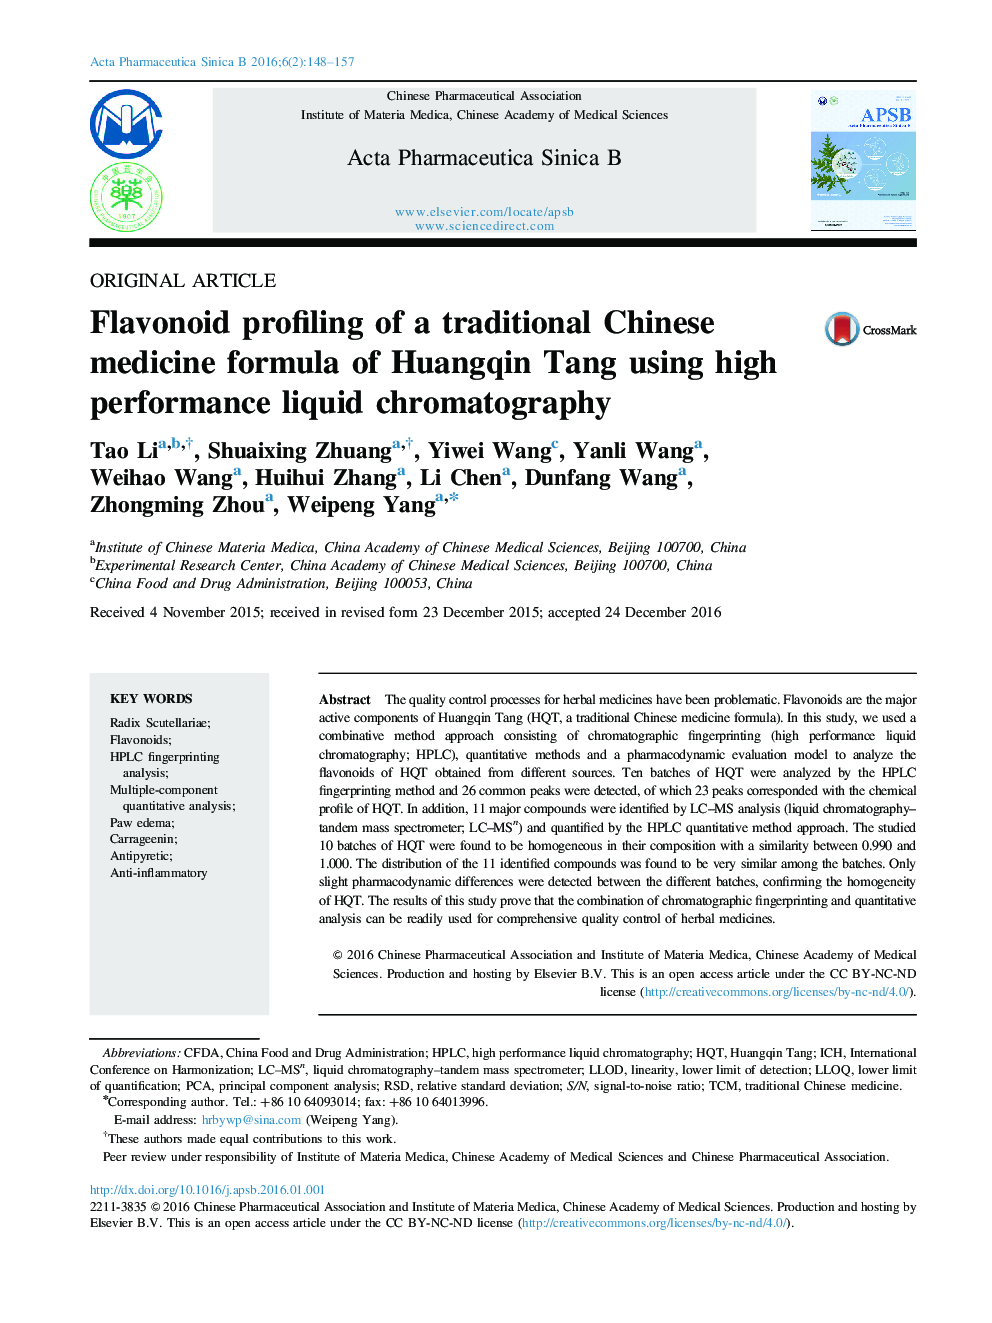 Flavonoid profiling of a traditional Chinese medicine formula of Huangqin Tang using high performance liquid chromatography 